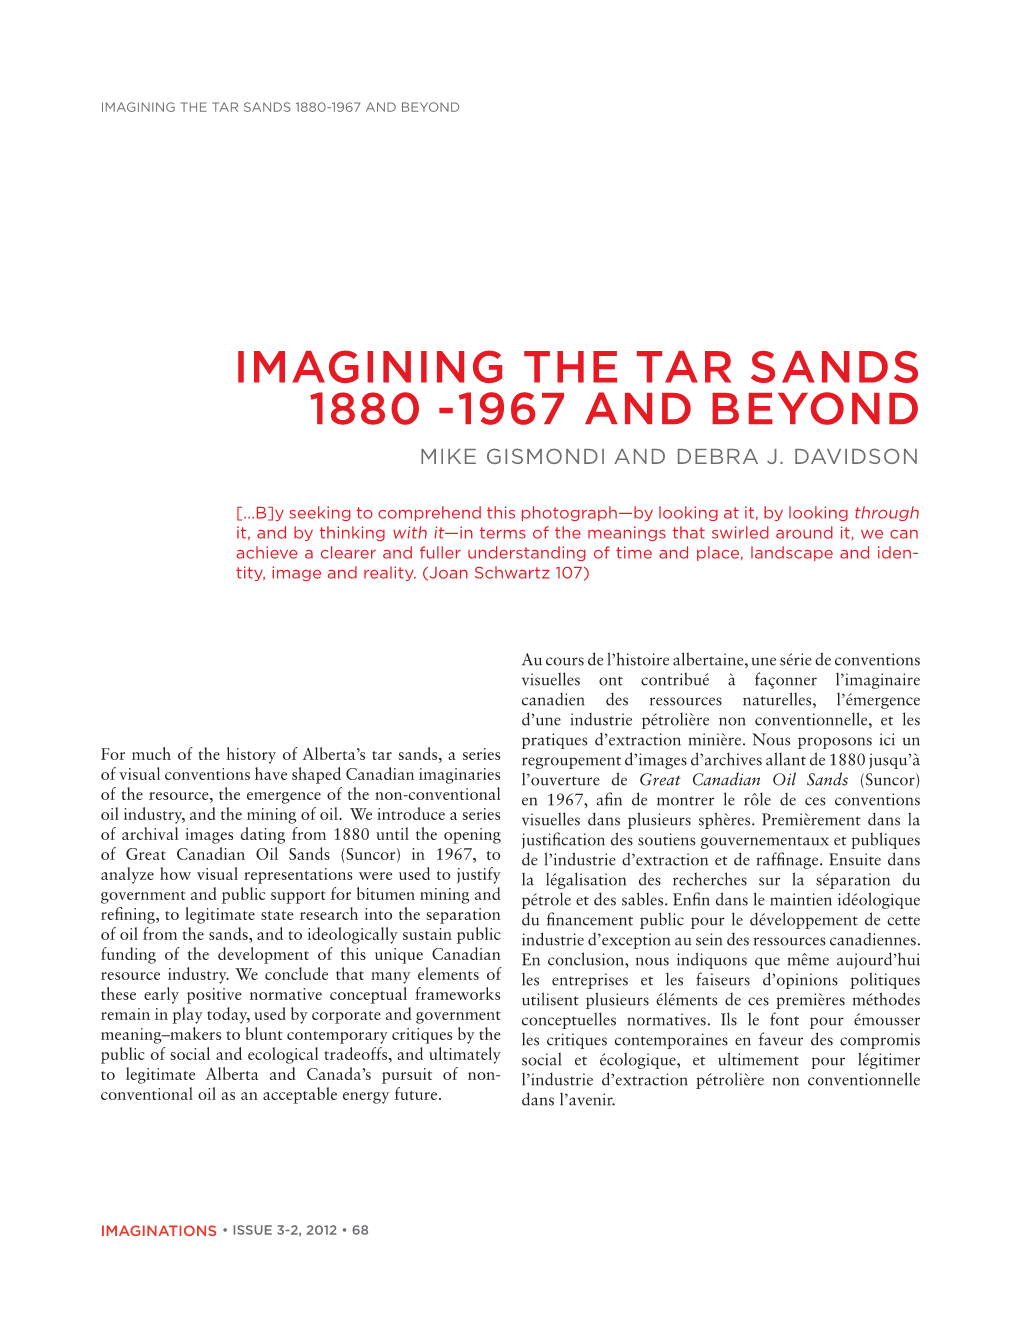 Imagining the Tar Sands 1880-1967 and Beyond